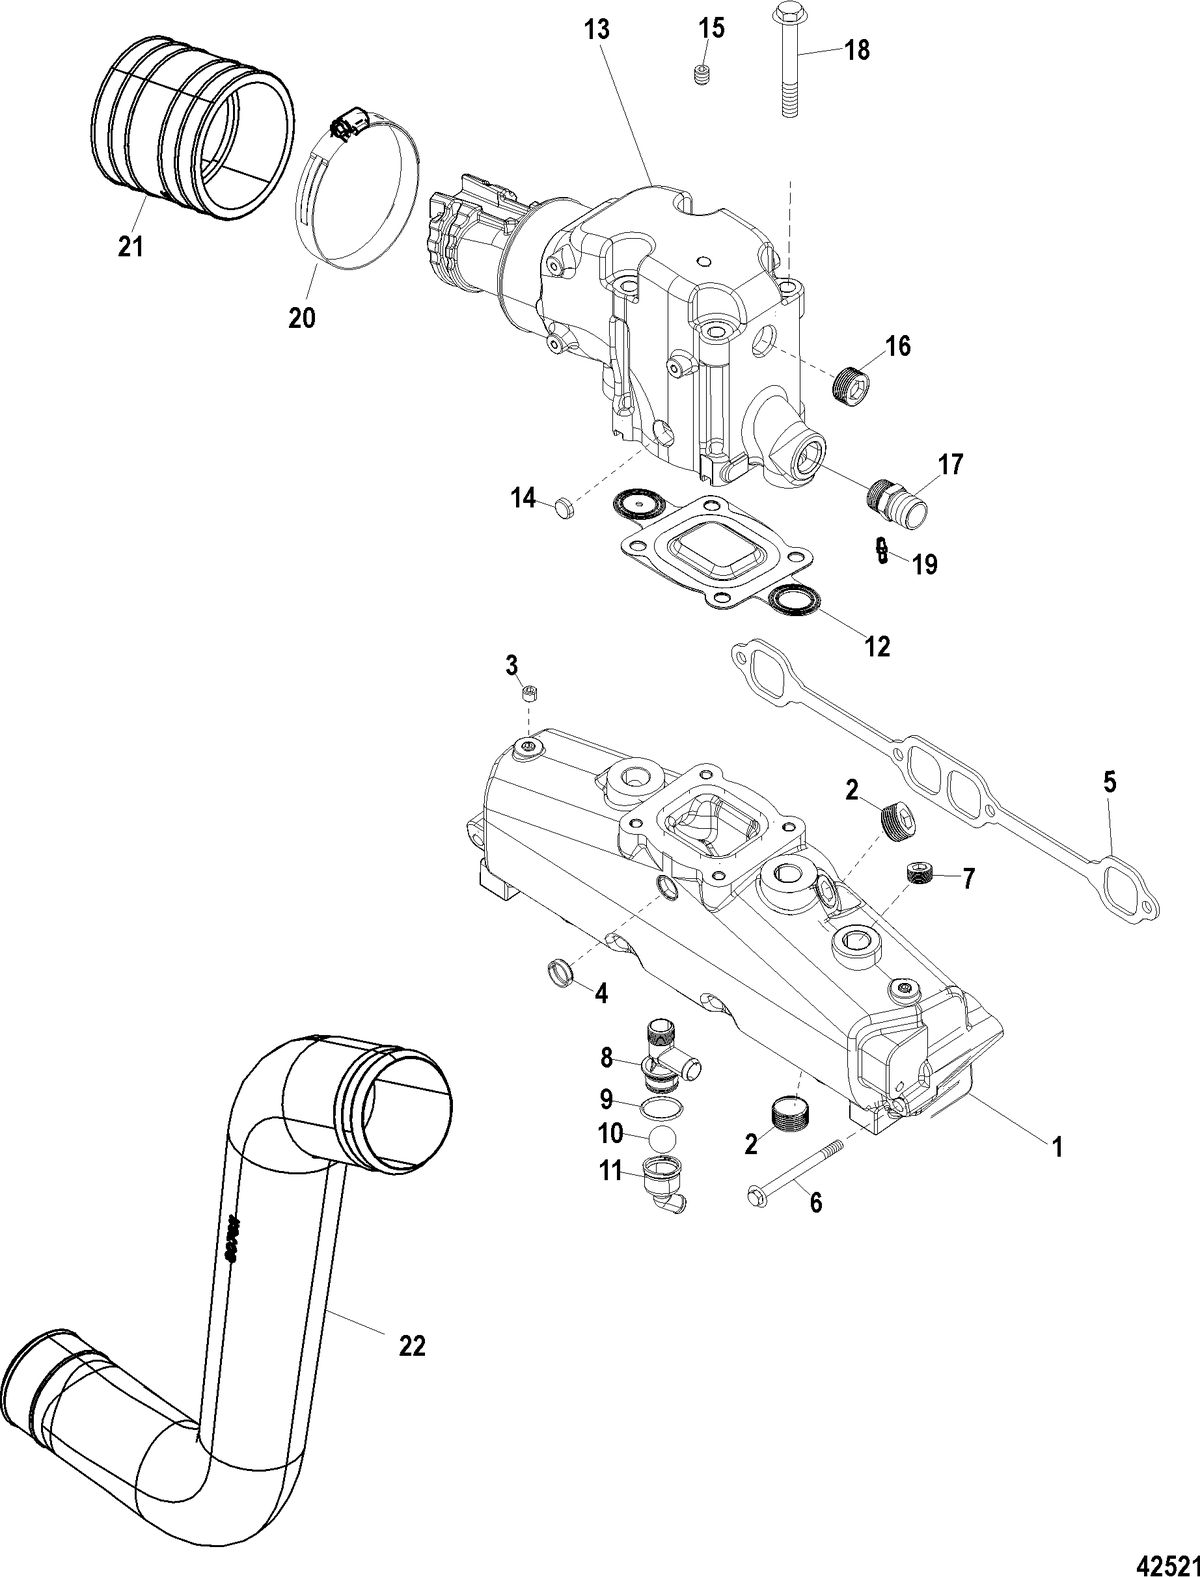 MERCRUISER 5.7L MPI TOWSPORT WITH GEN III Exhaust Manifold, Elbow And Pipes